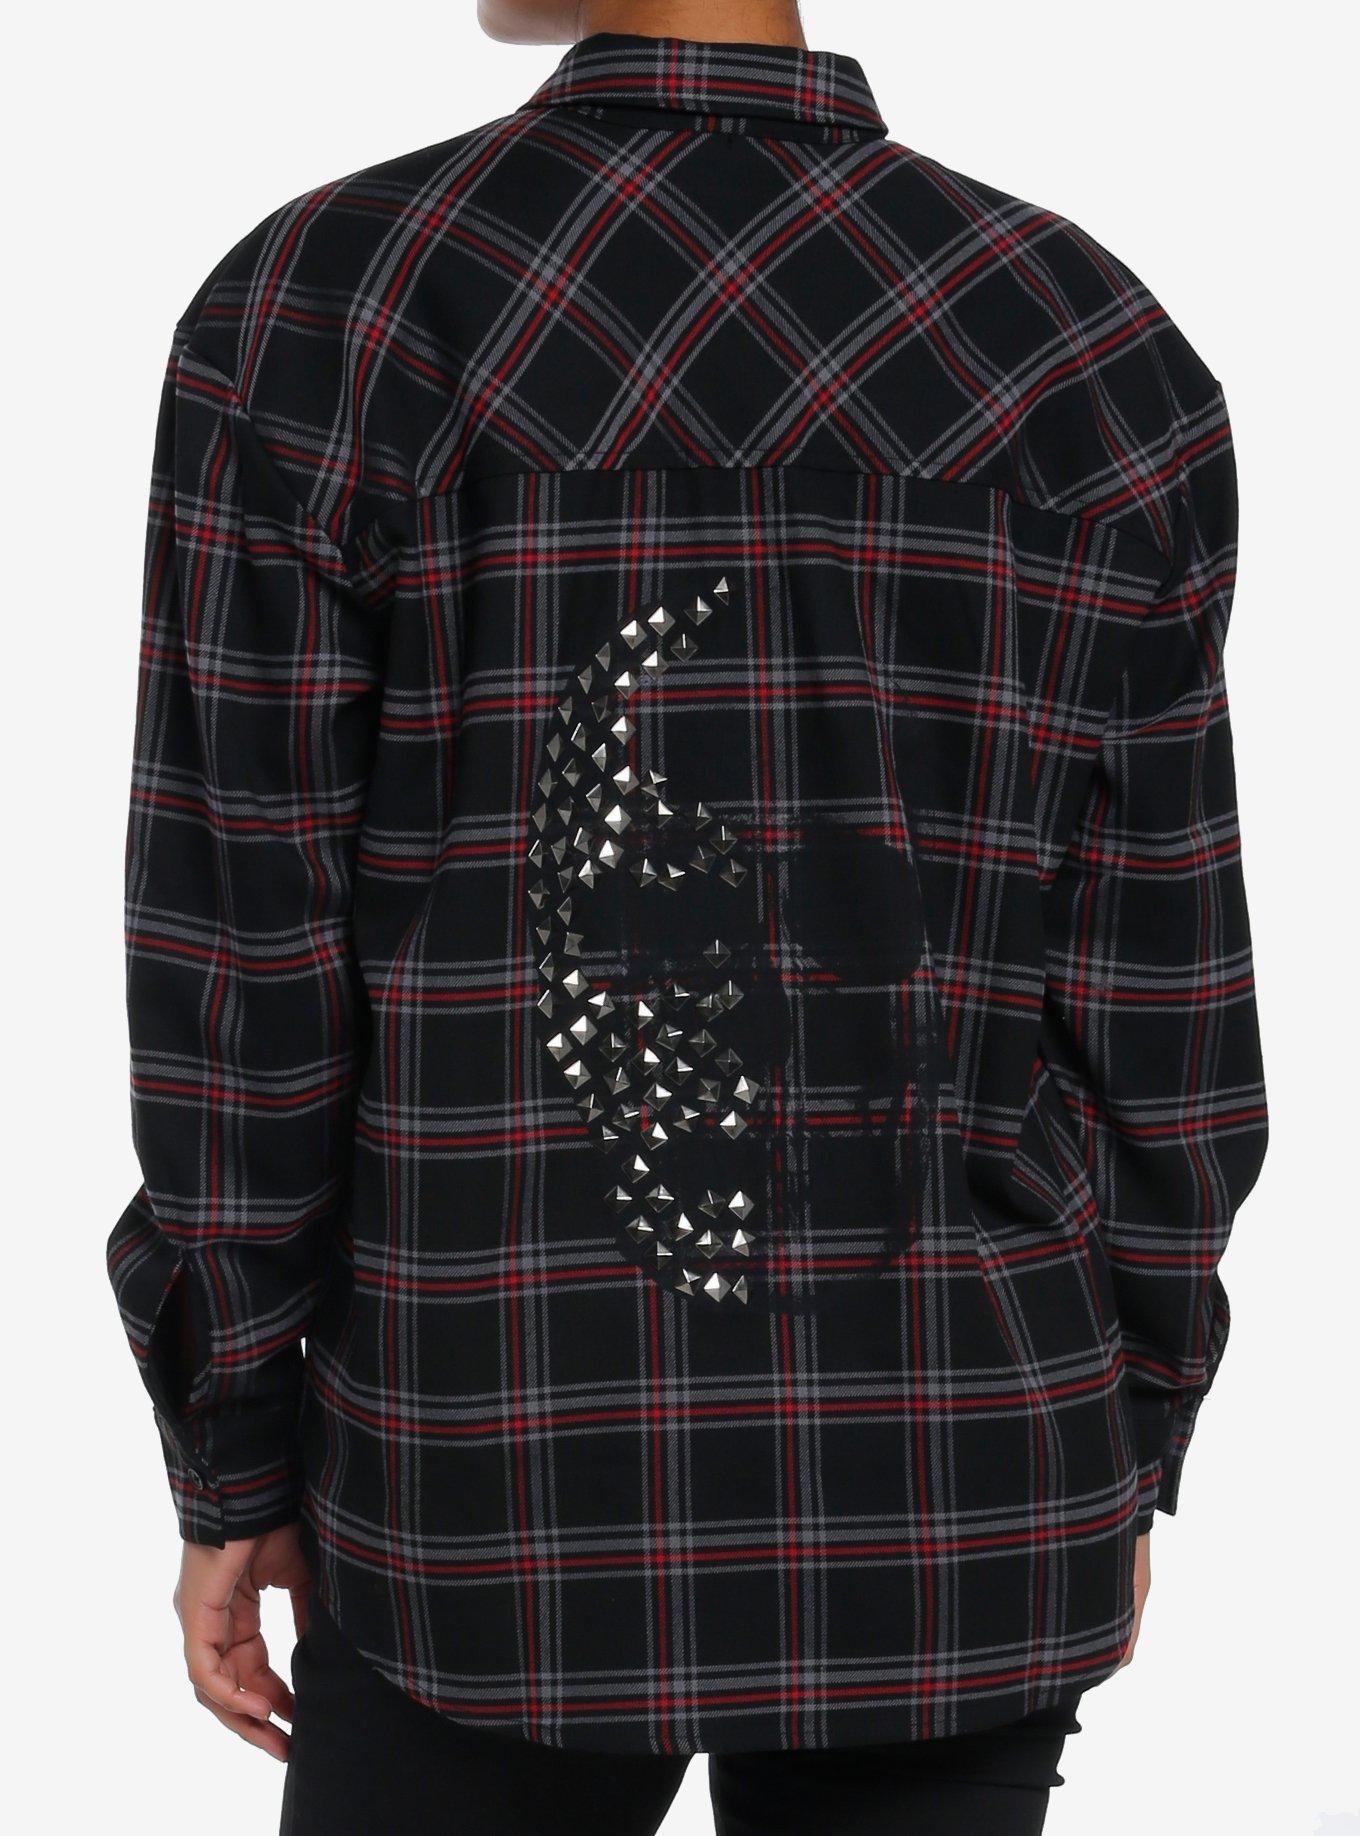 Social Collision Black & Red Plaid Skull Stud Girls Flannel Button-Up